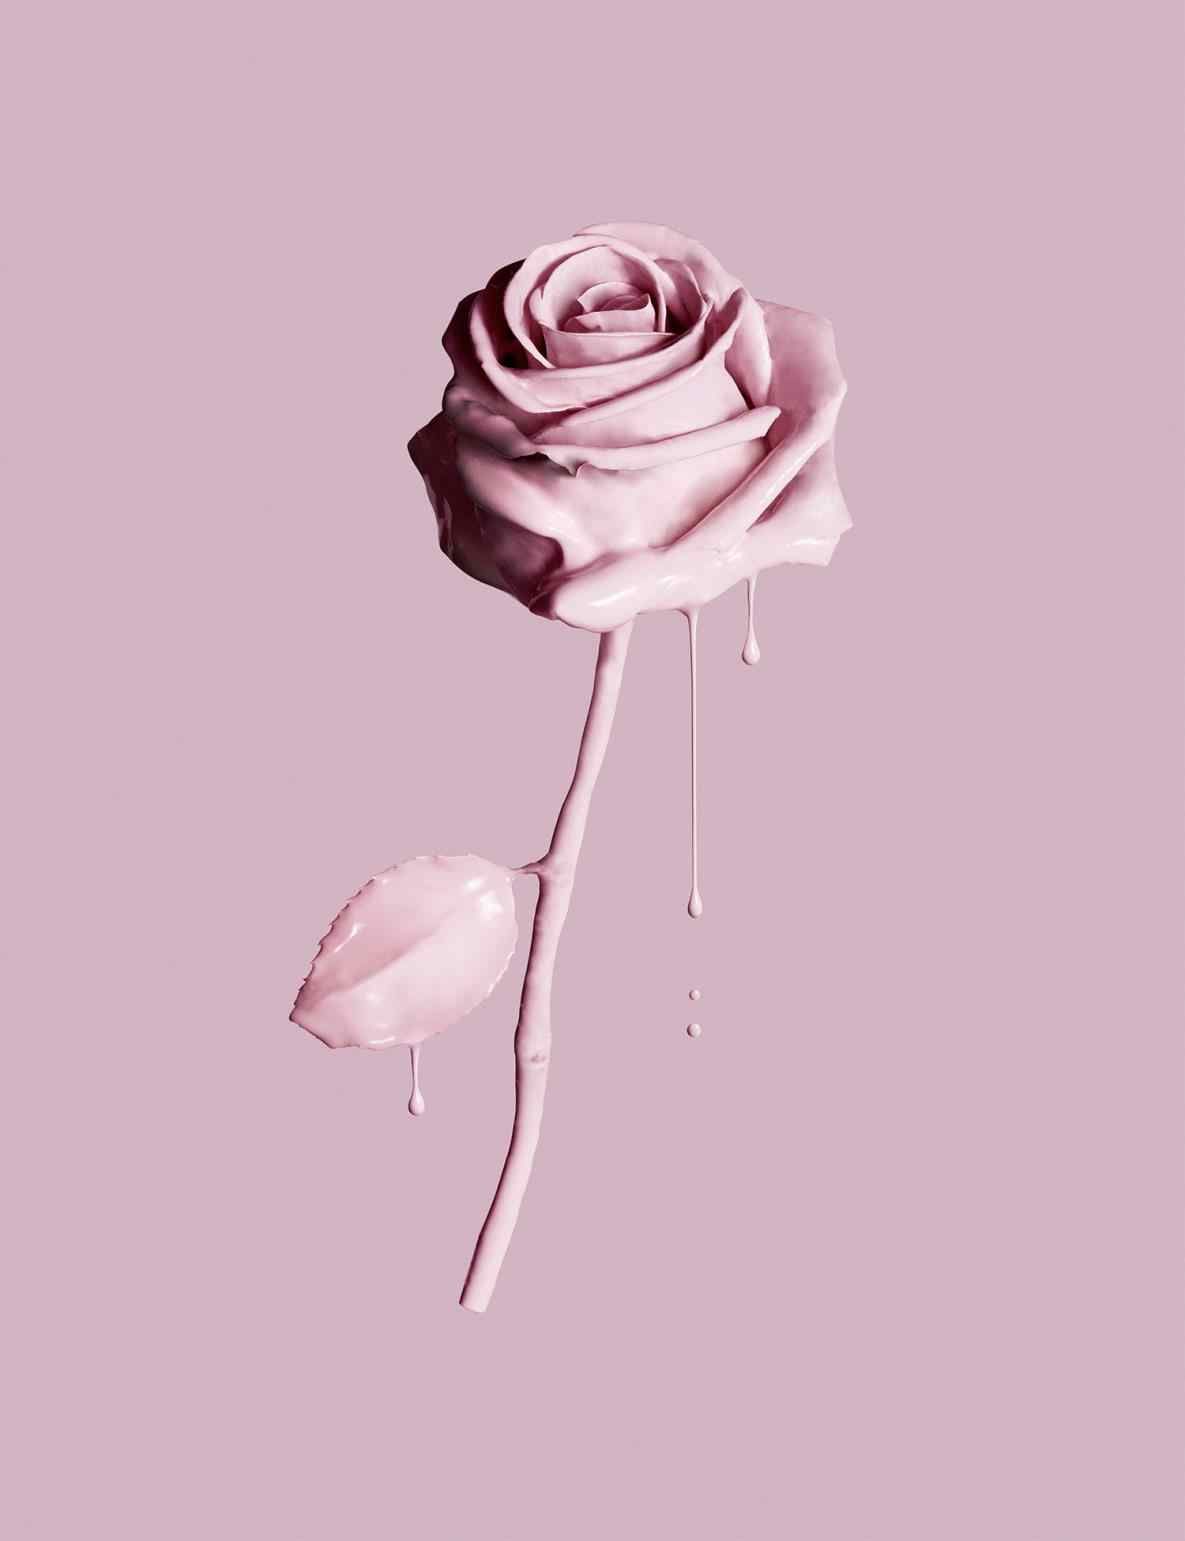 A pink rose on a pink background - Rose gold